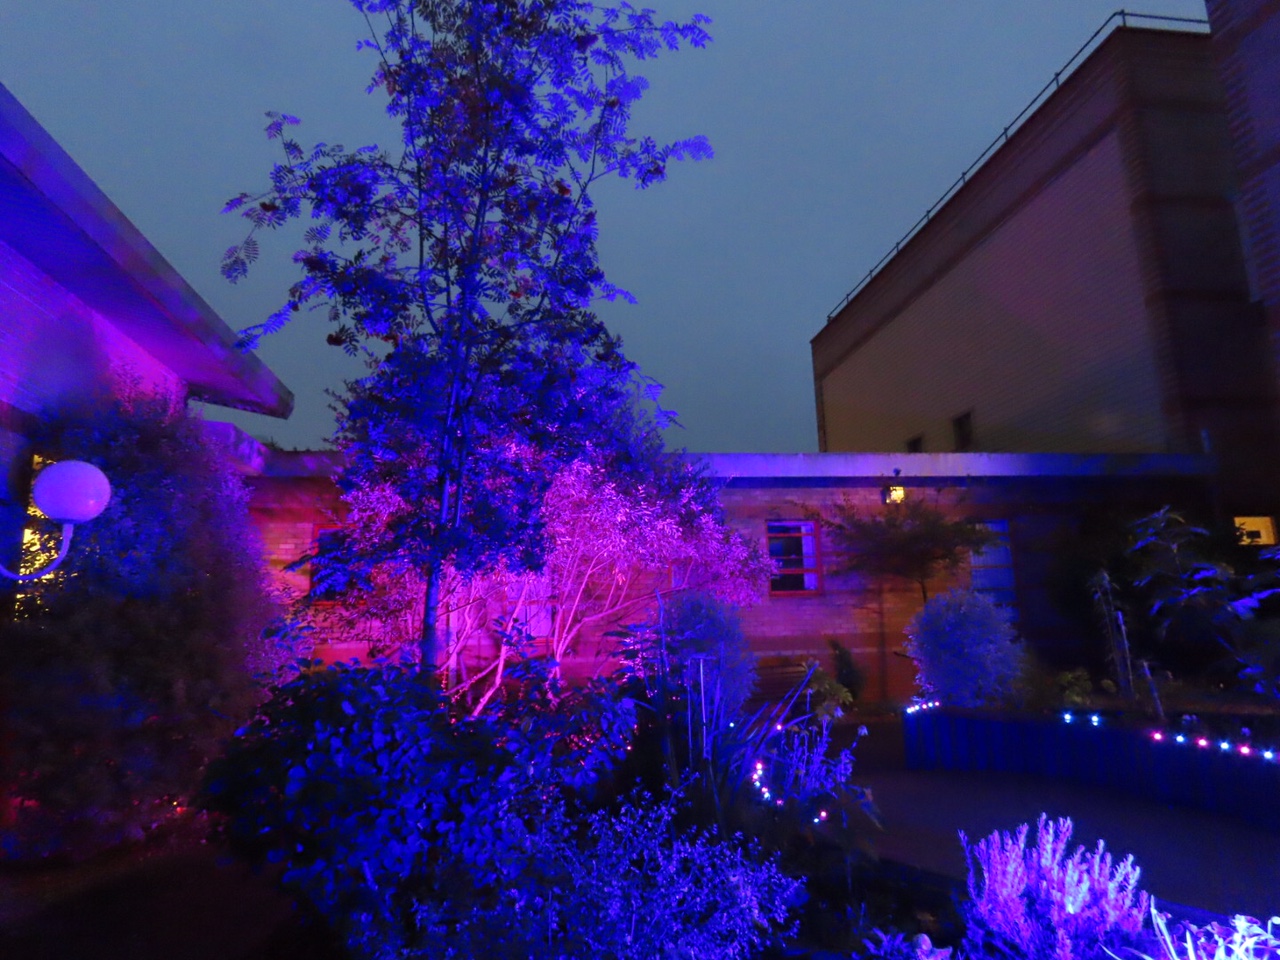 New lights have been installed in the baby gardens at Southport Hospital and Ormskirk Hospital by IllumiDex UK Ltd. Photo by Andrew Brown Media